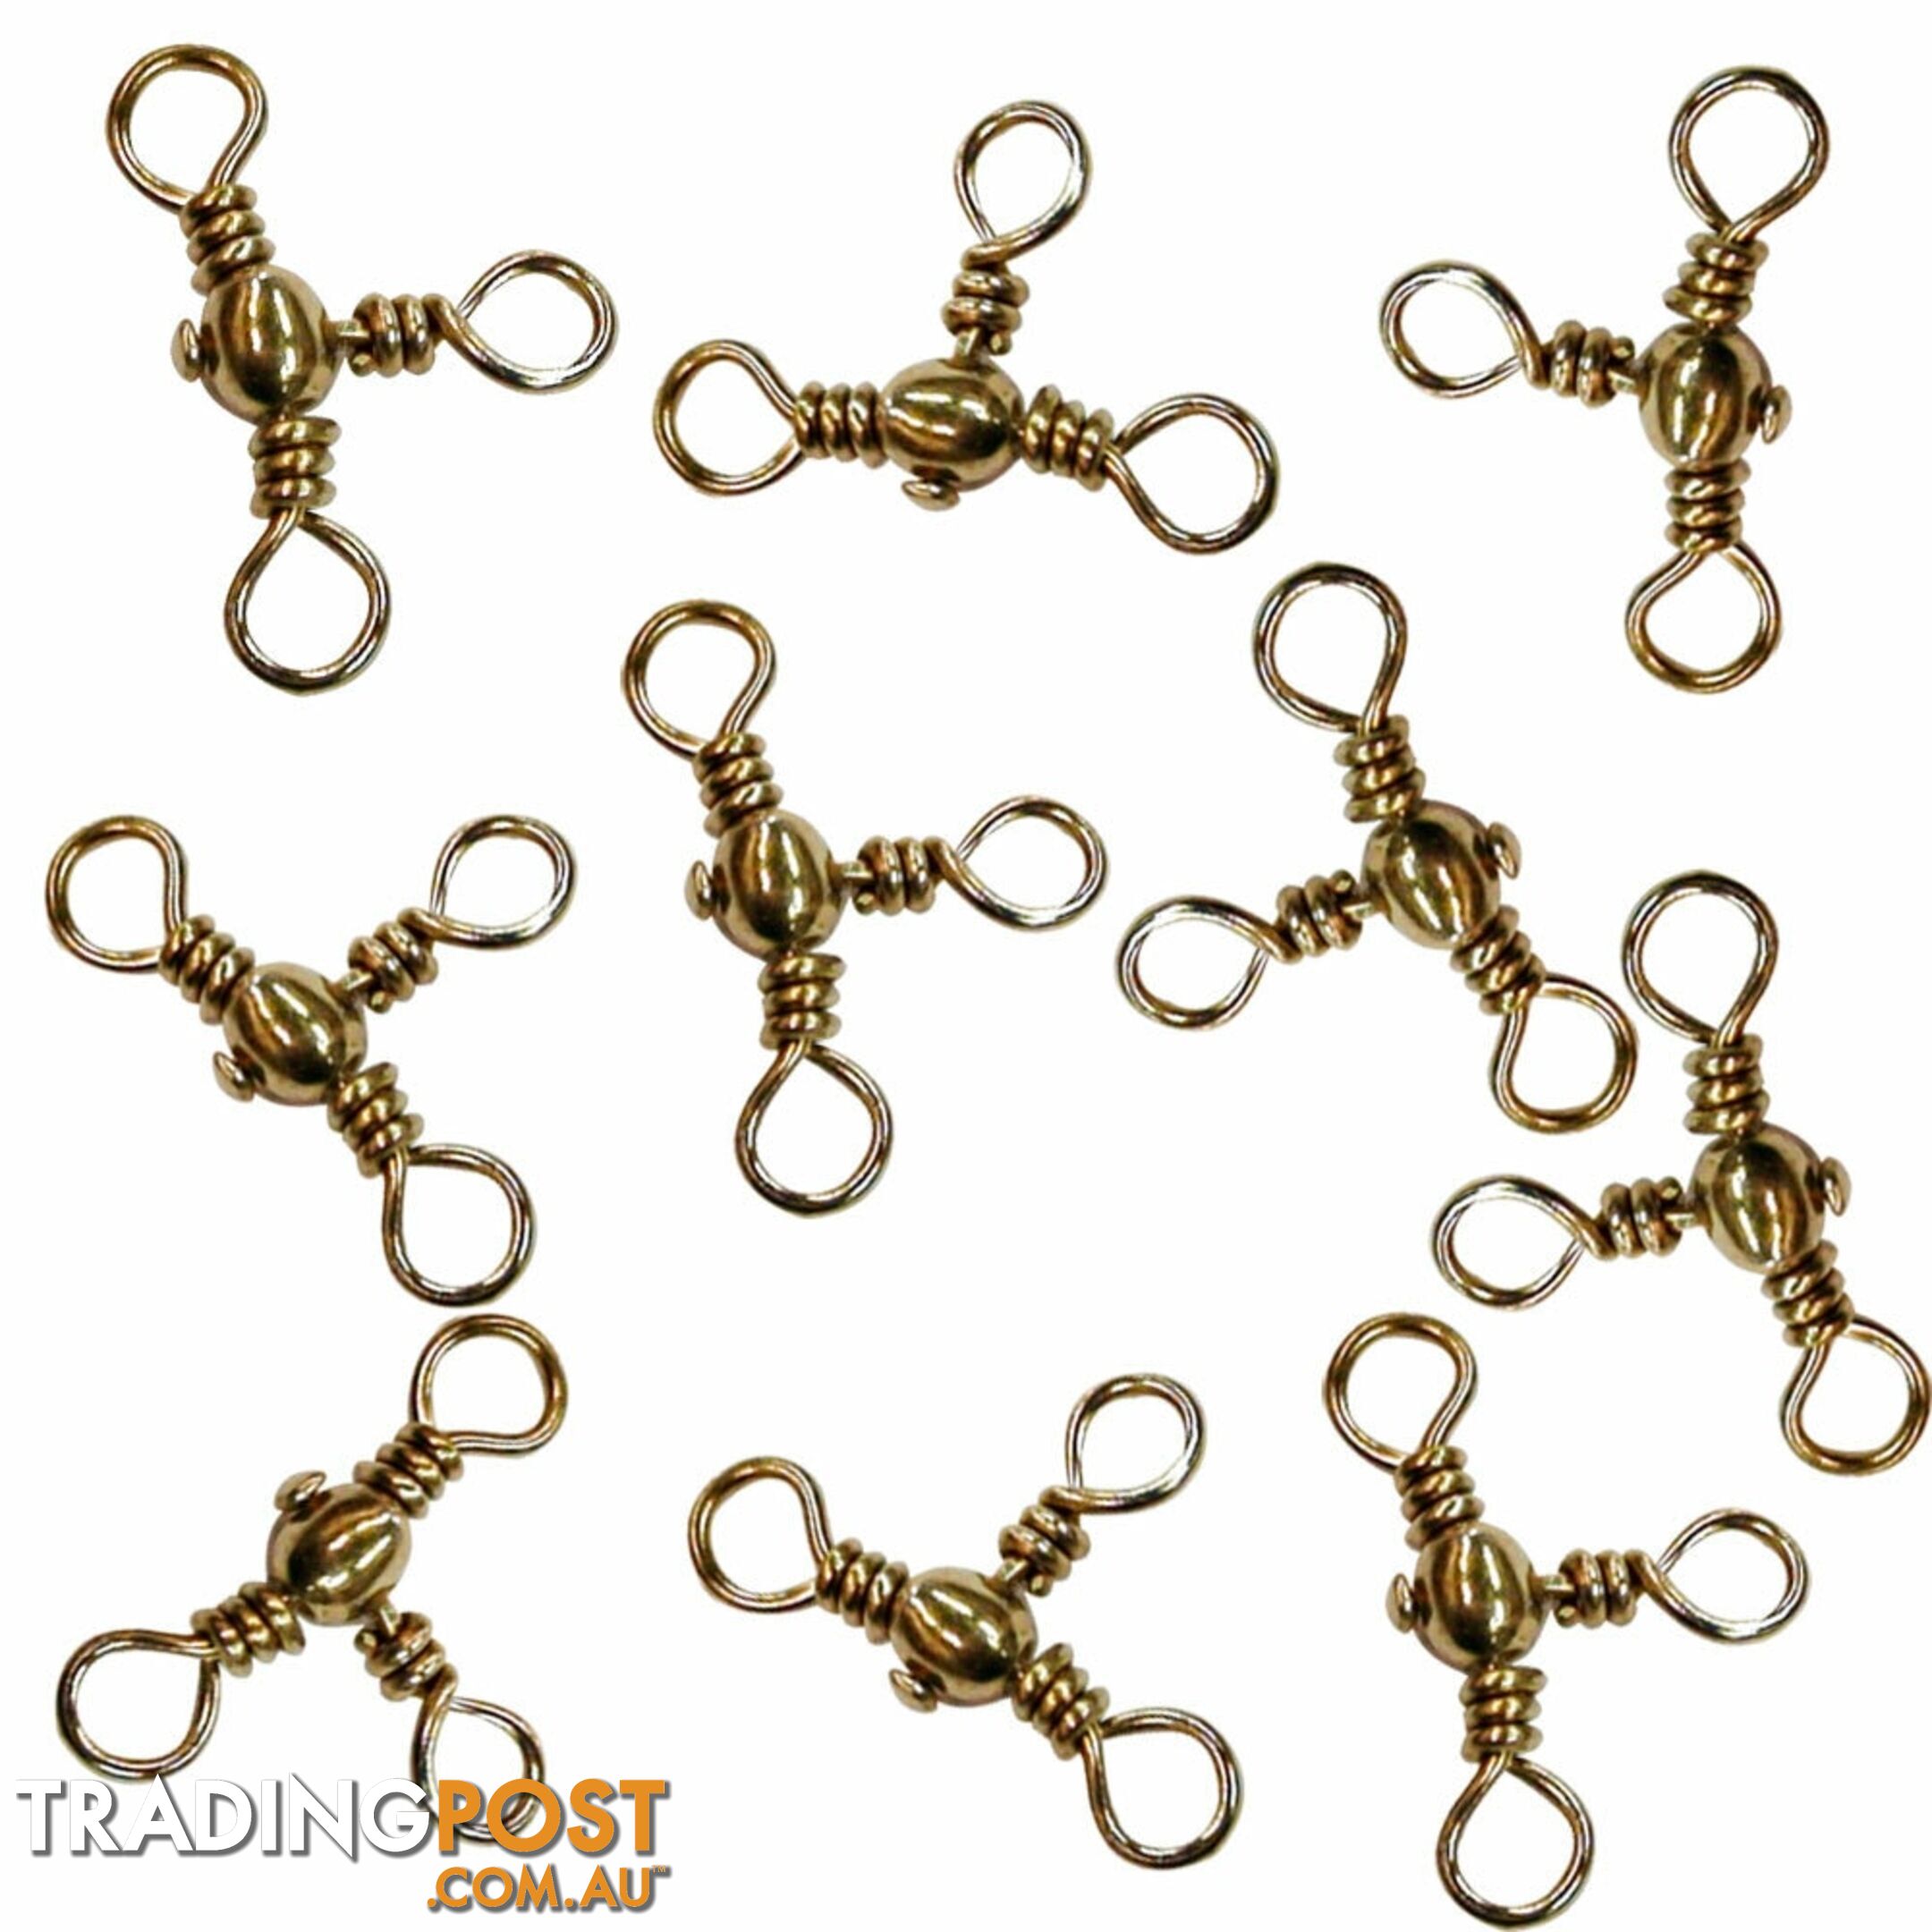 Crossline 3 Way Fishing Swivels (Pack of 10) - CLS - Fishing Gear Other